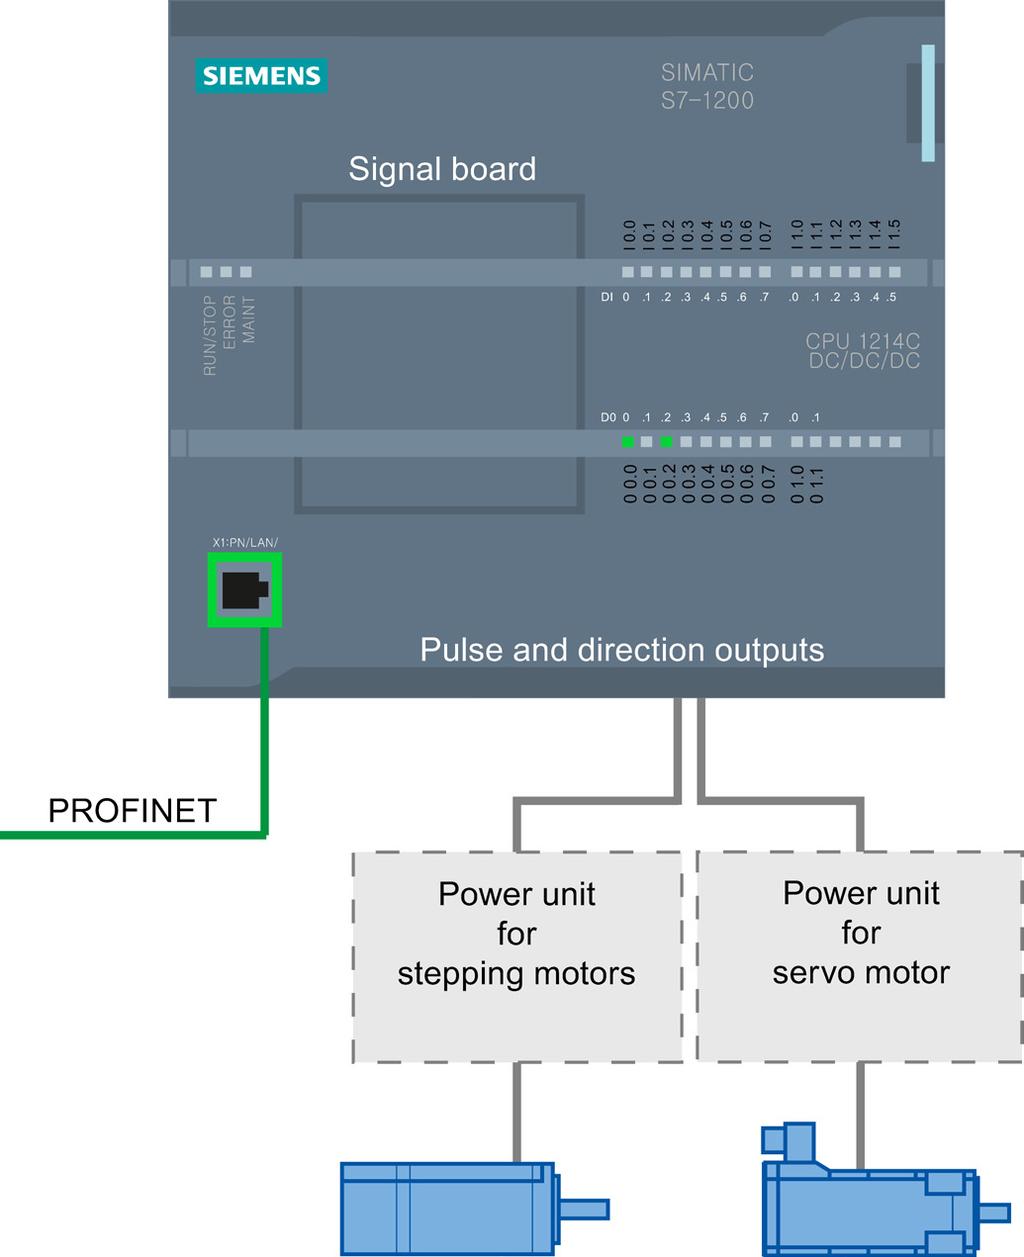 1.1 Introduction 1.1.2 Hardware components for motion control The representation below shows the basic hardware configuration for a motion control application with the CPU S7-1200.